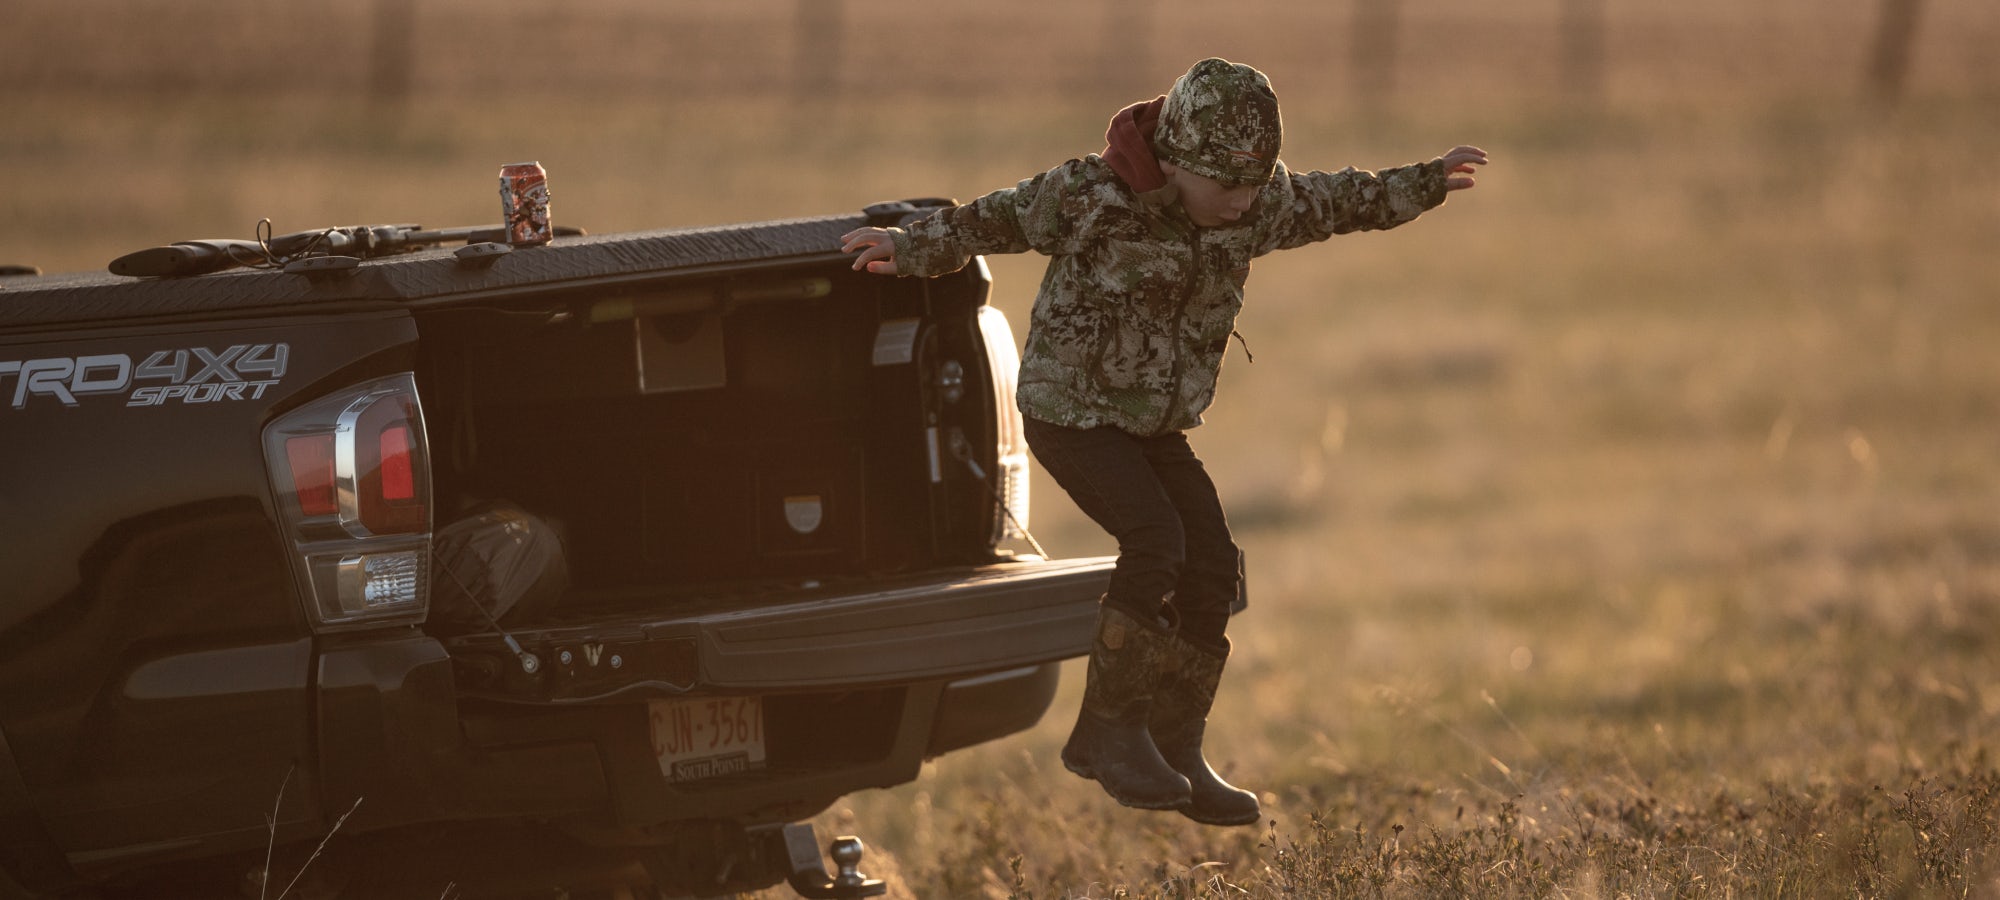 Holiday Gift Ideas for Youth | SITKA Gear